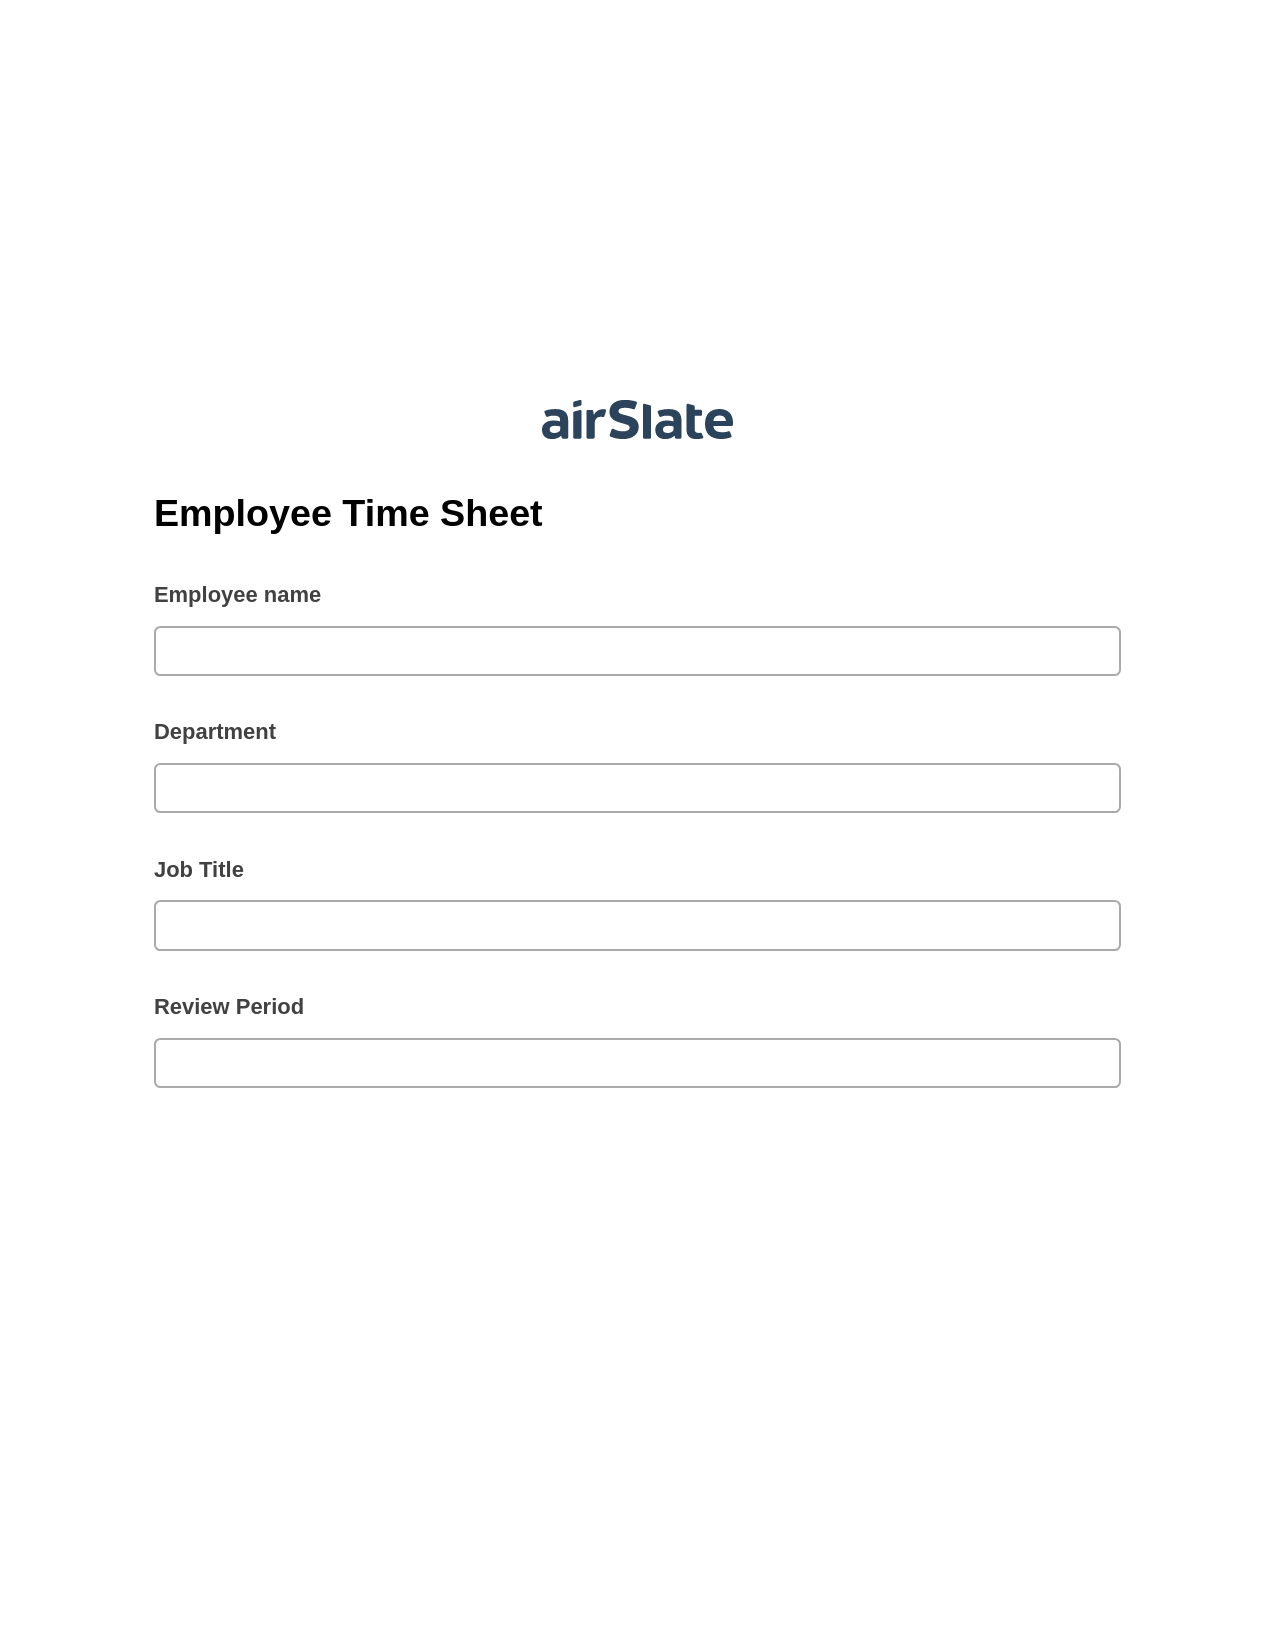 Multirole Employee Time Sheet Pre-fill from Google Sheets Bot, Create slate addon, Archive to Box Bot